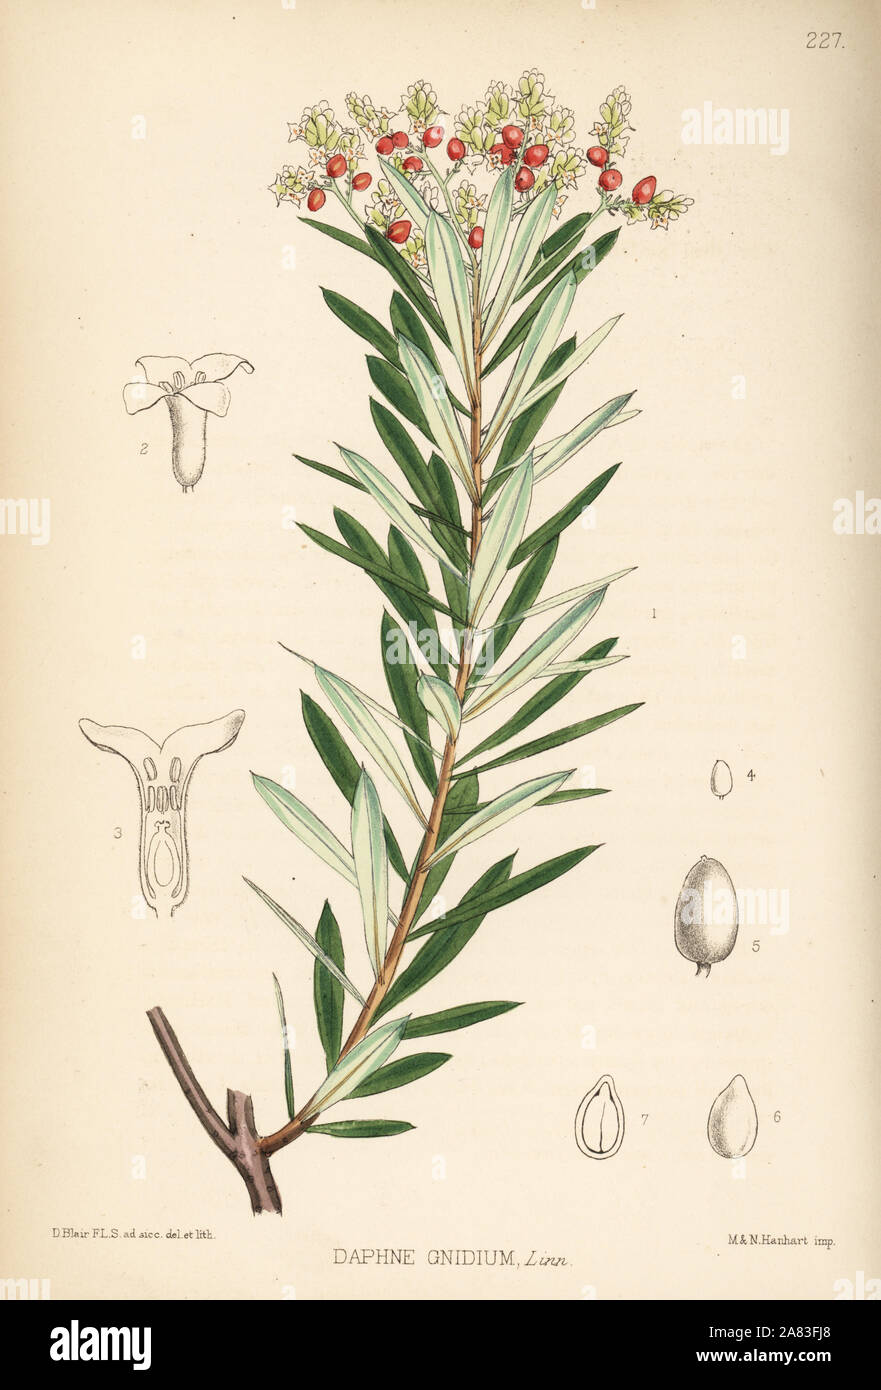 Spurge flax or flax-leaved daphne, Daphne gnidium. Handcoloured lithograph by Hanhart after a botanical illustration by David Blair from Robert Bentley and Henry Trimen's Medicinal Plants, London, 1880. Stock Photo